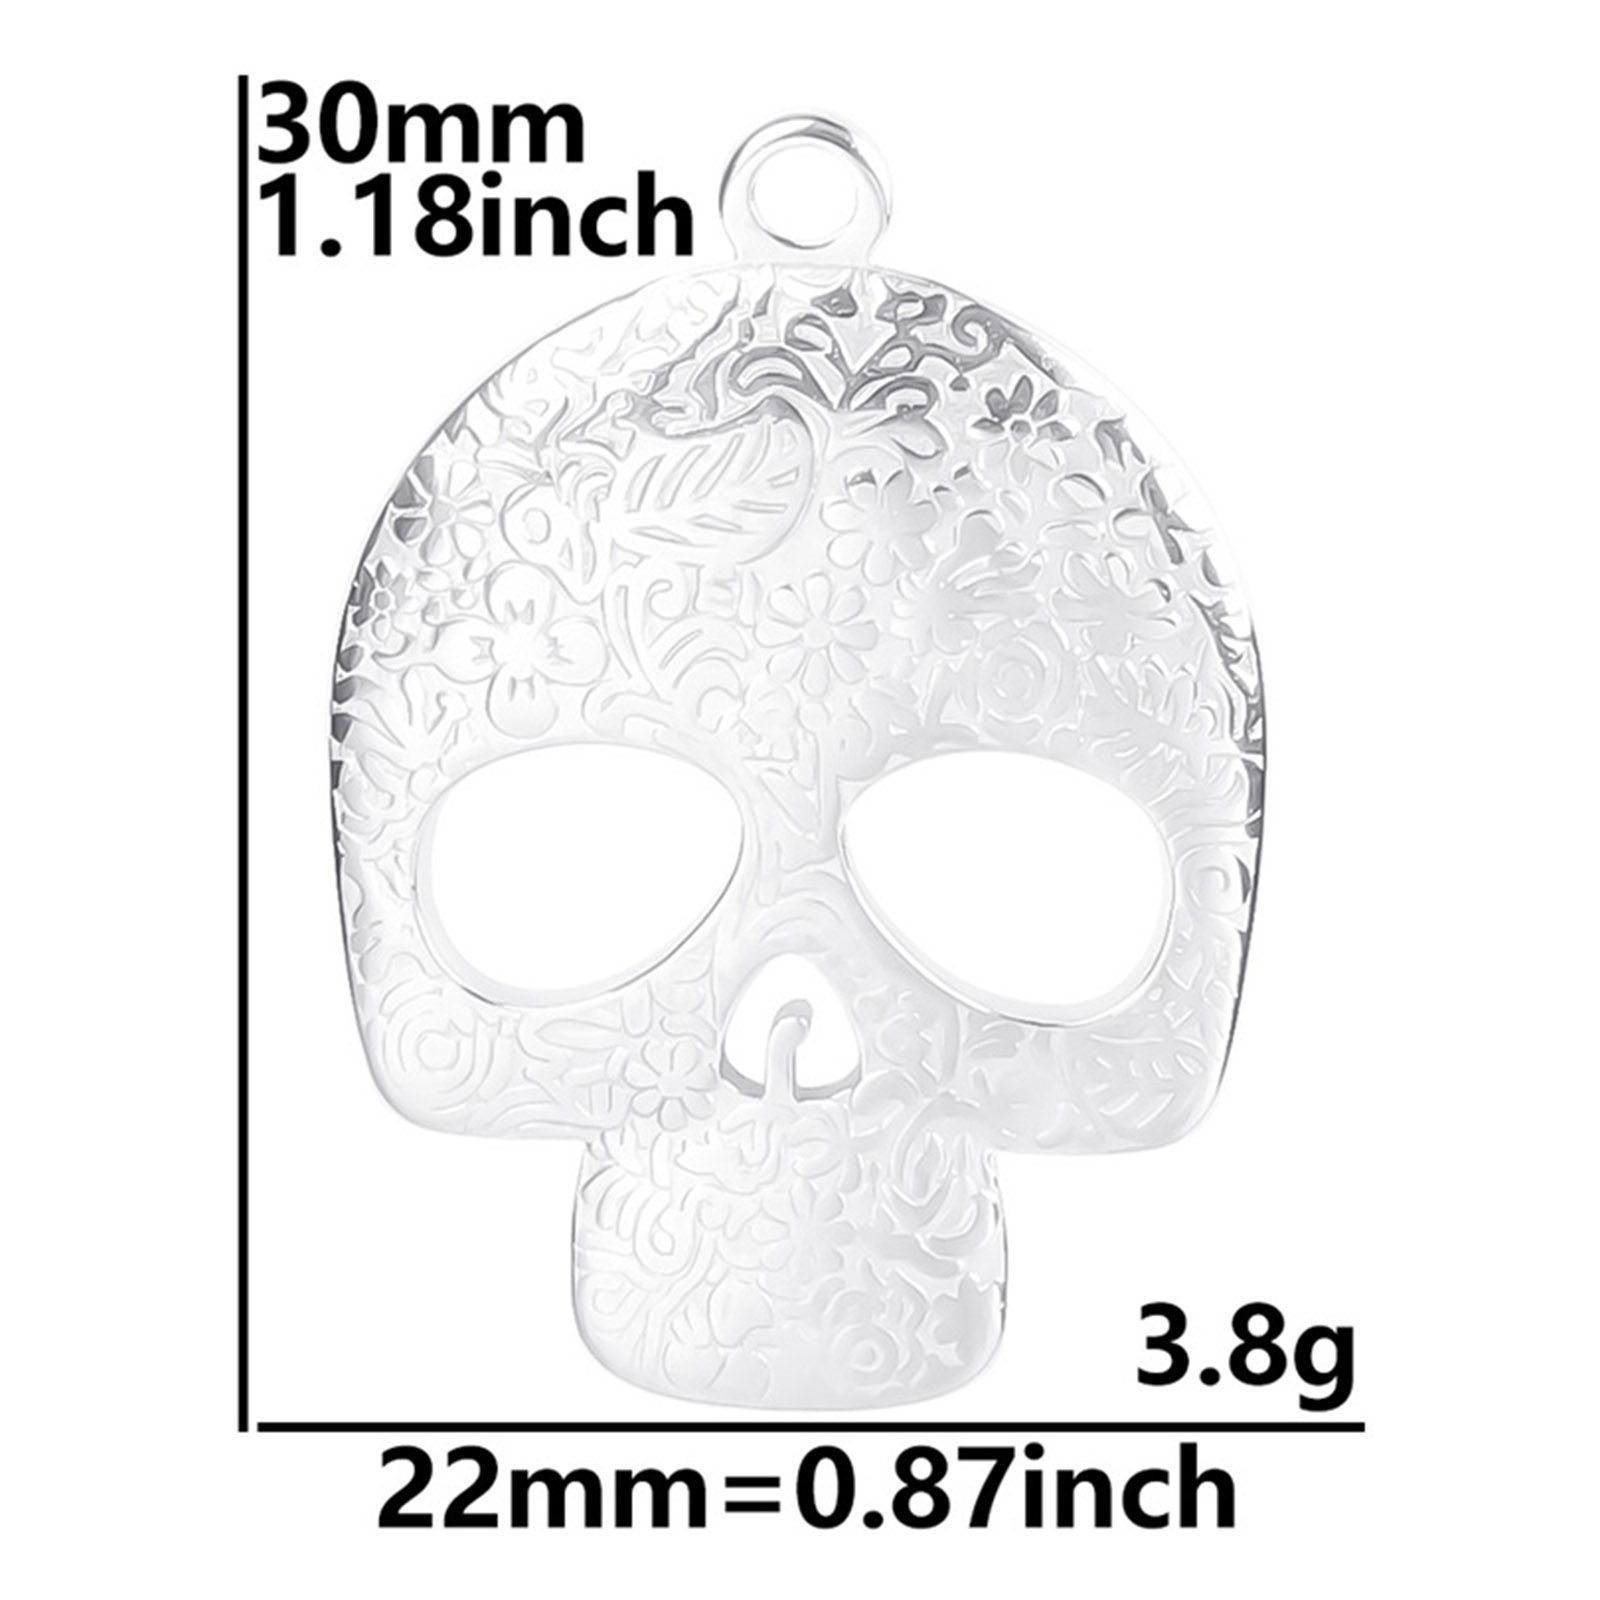 Picture of Stainless Steel Halloween Charms Multicolor Skull Carved Pattern Hollow